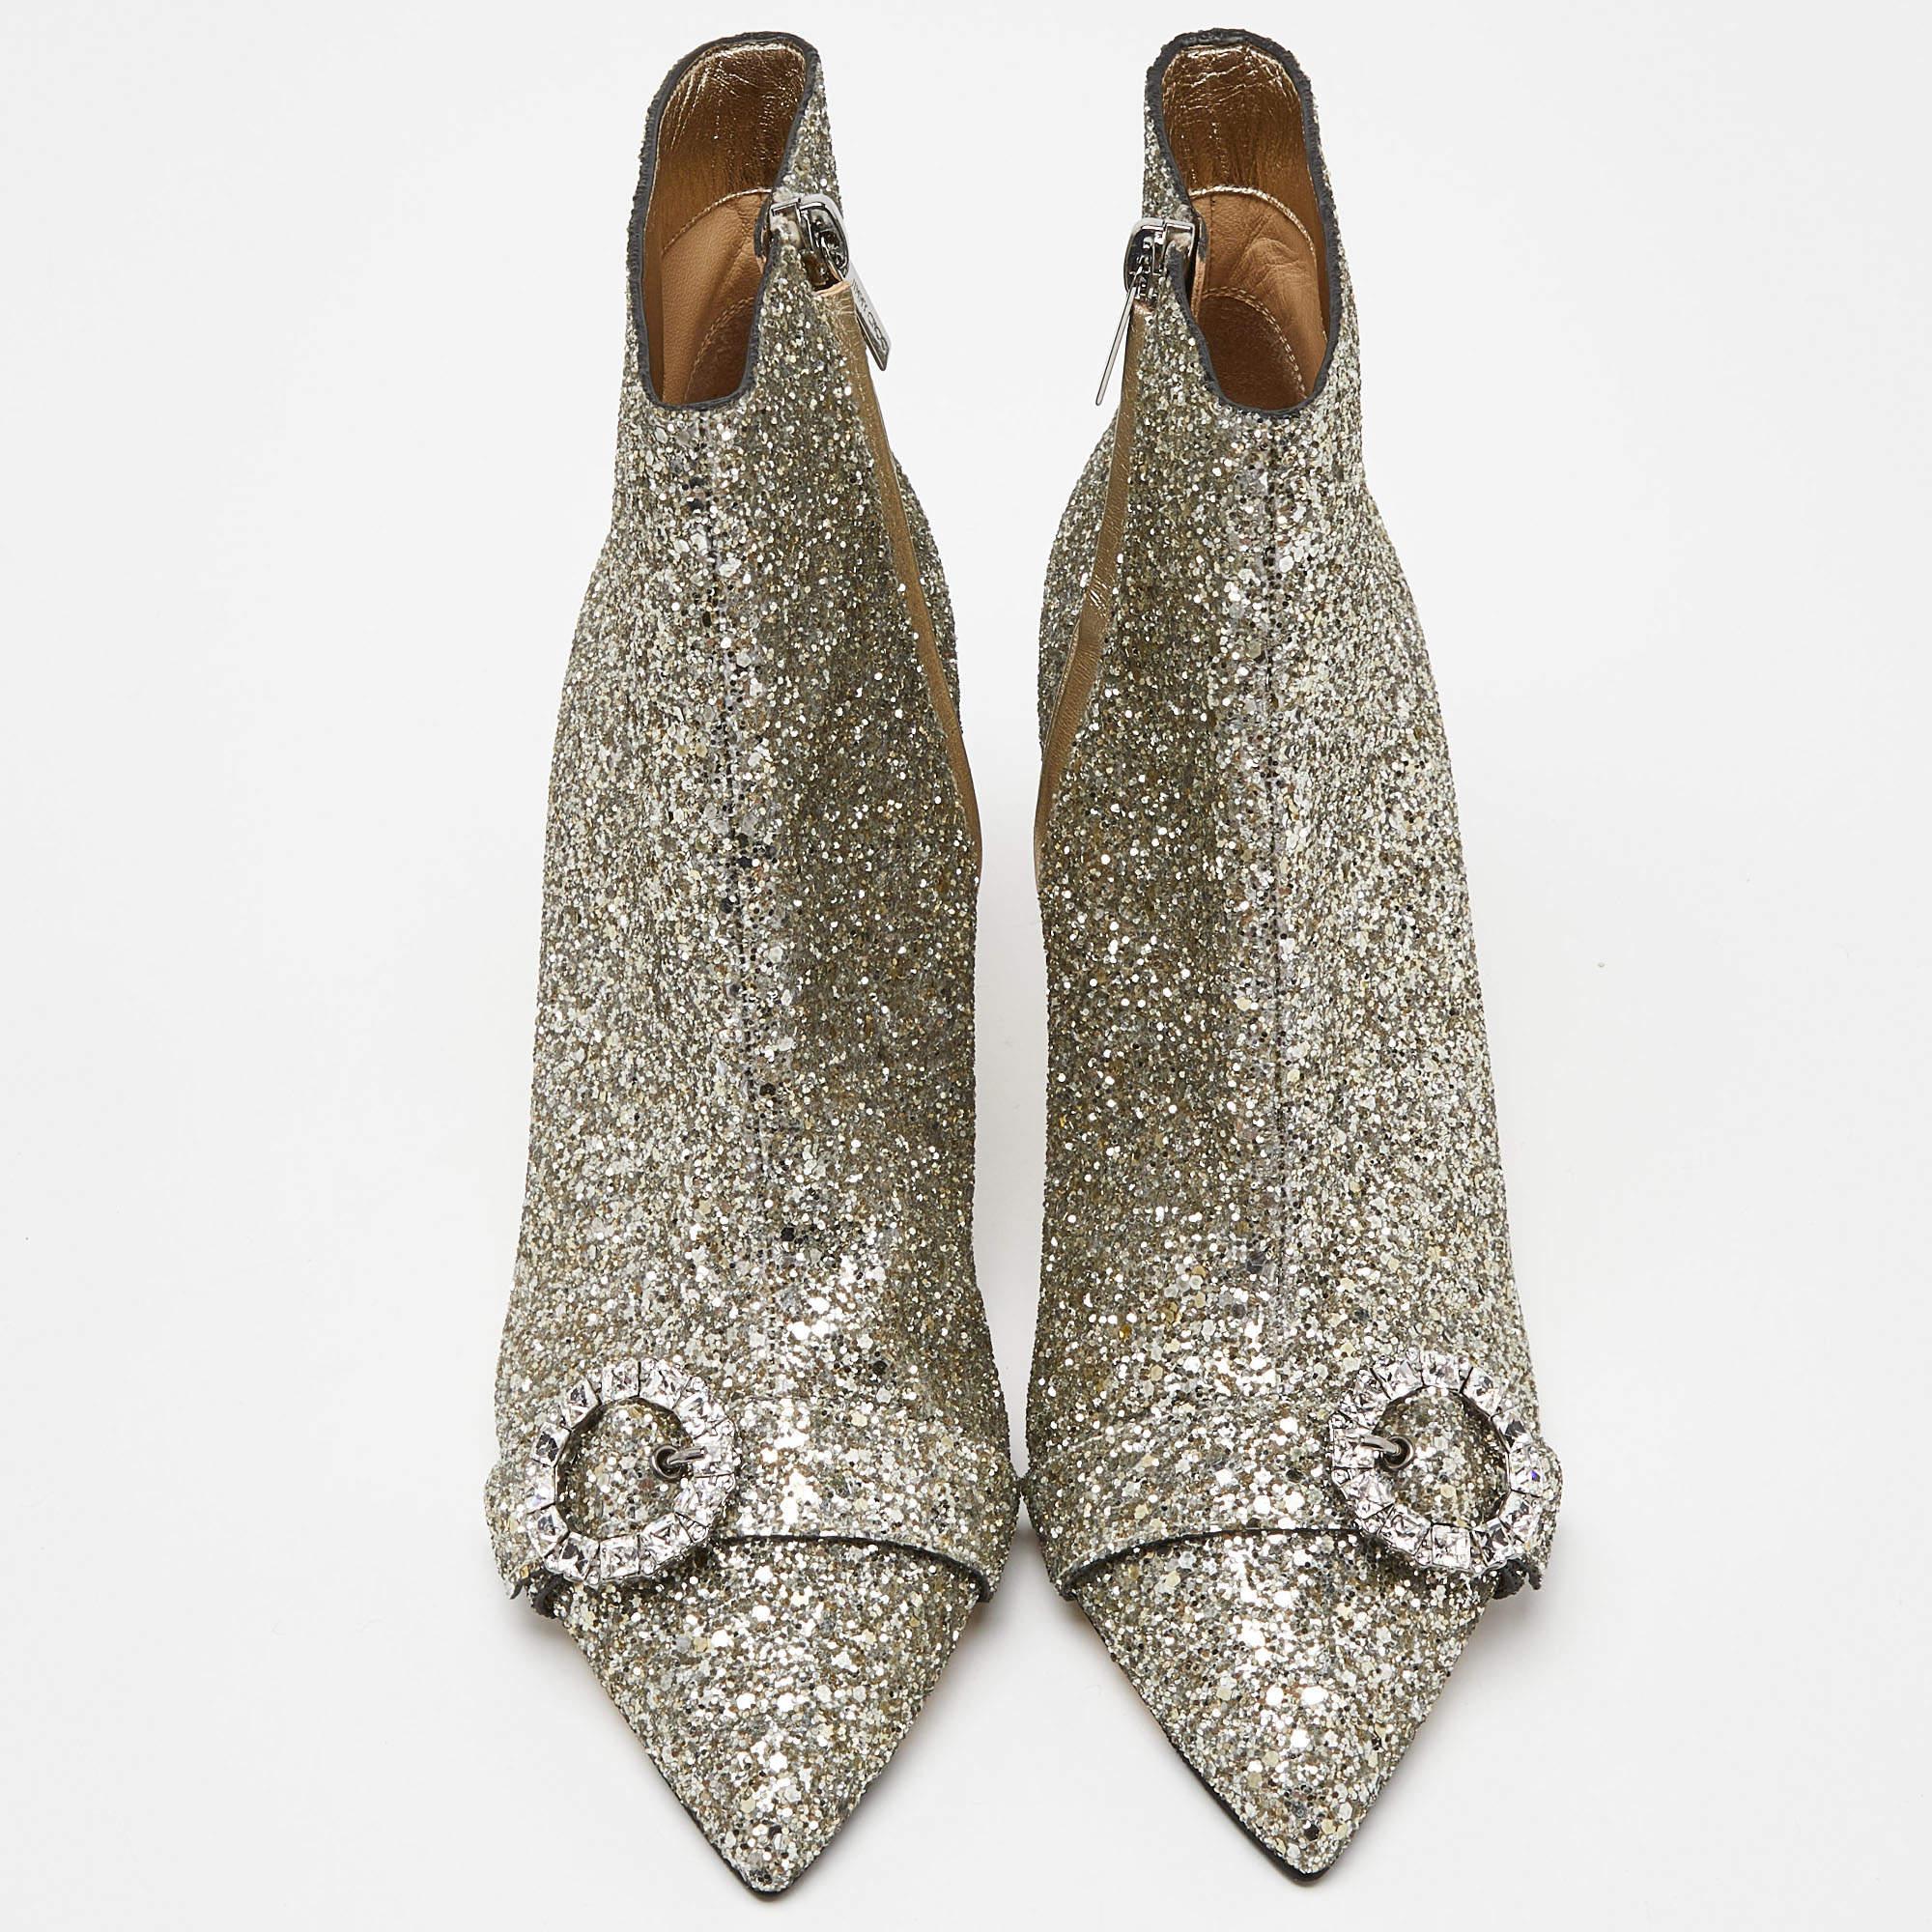 A pair of silver glitter booties to add that extra tinge of luxury to any outfit! The design is by Jimmy Choo, and it has a pointed-toe silhouette set on low heels.

